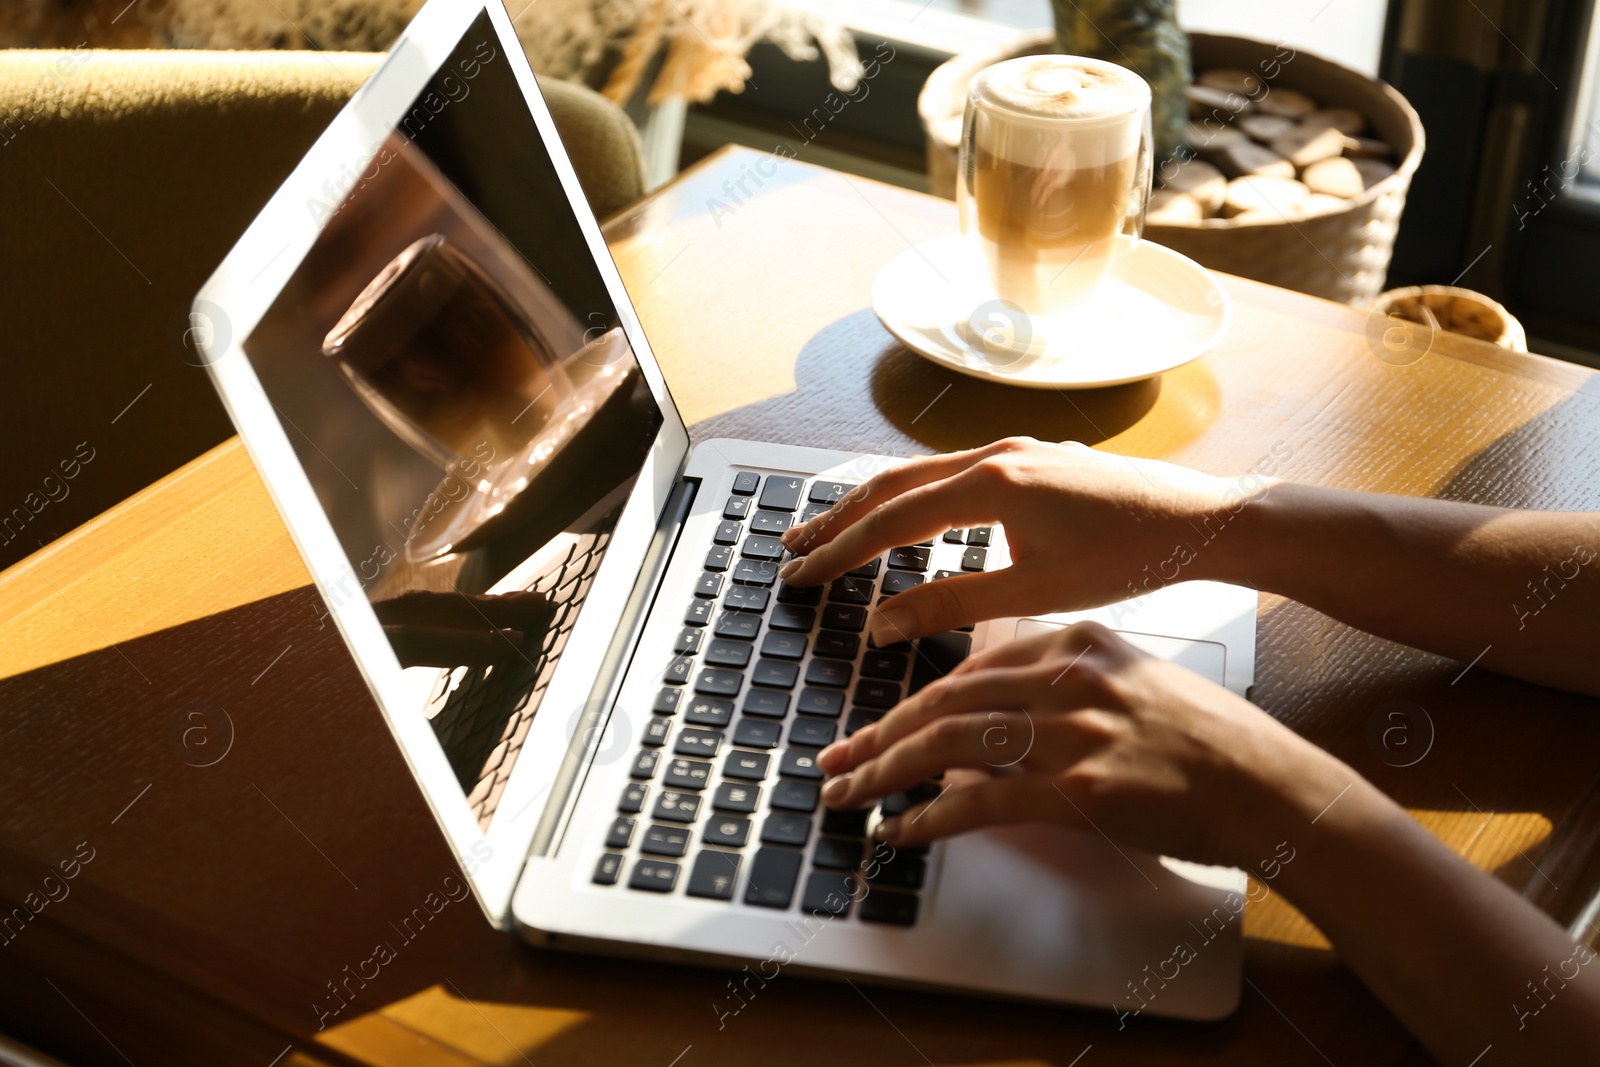 Photo of Woman using laptop at table, closeup of hands